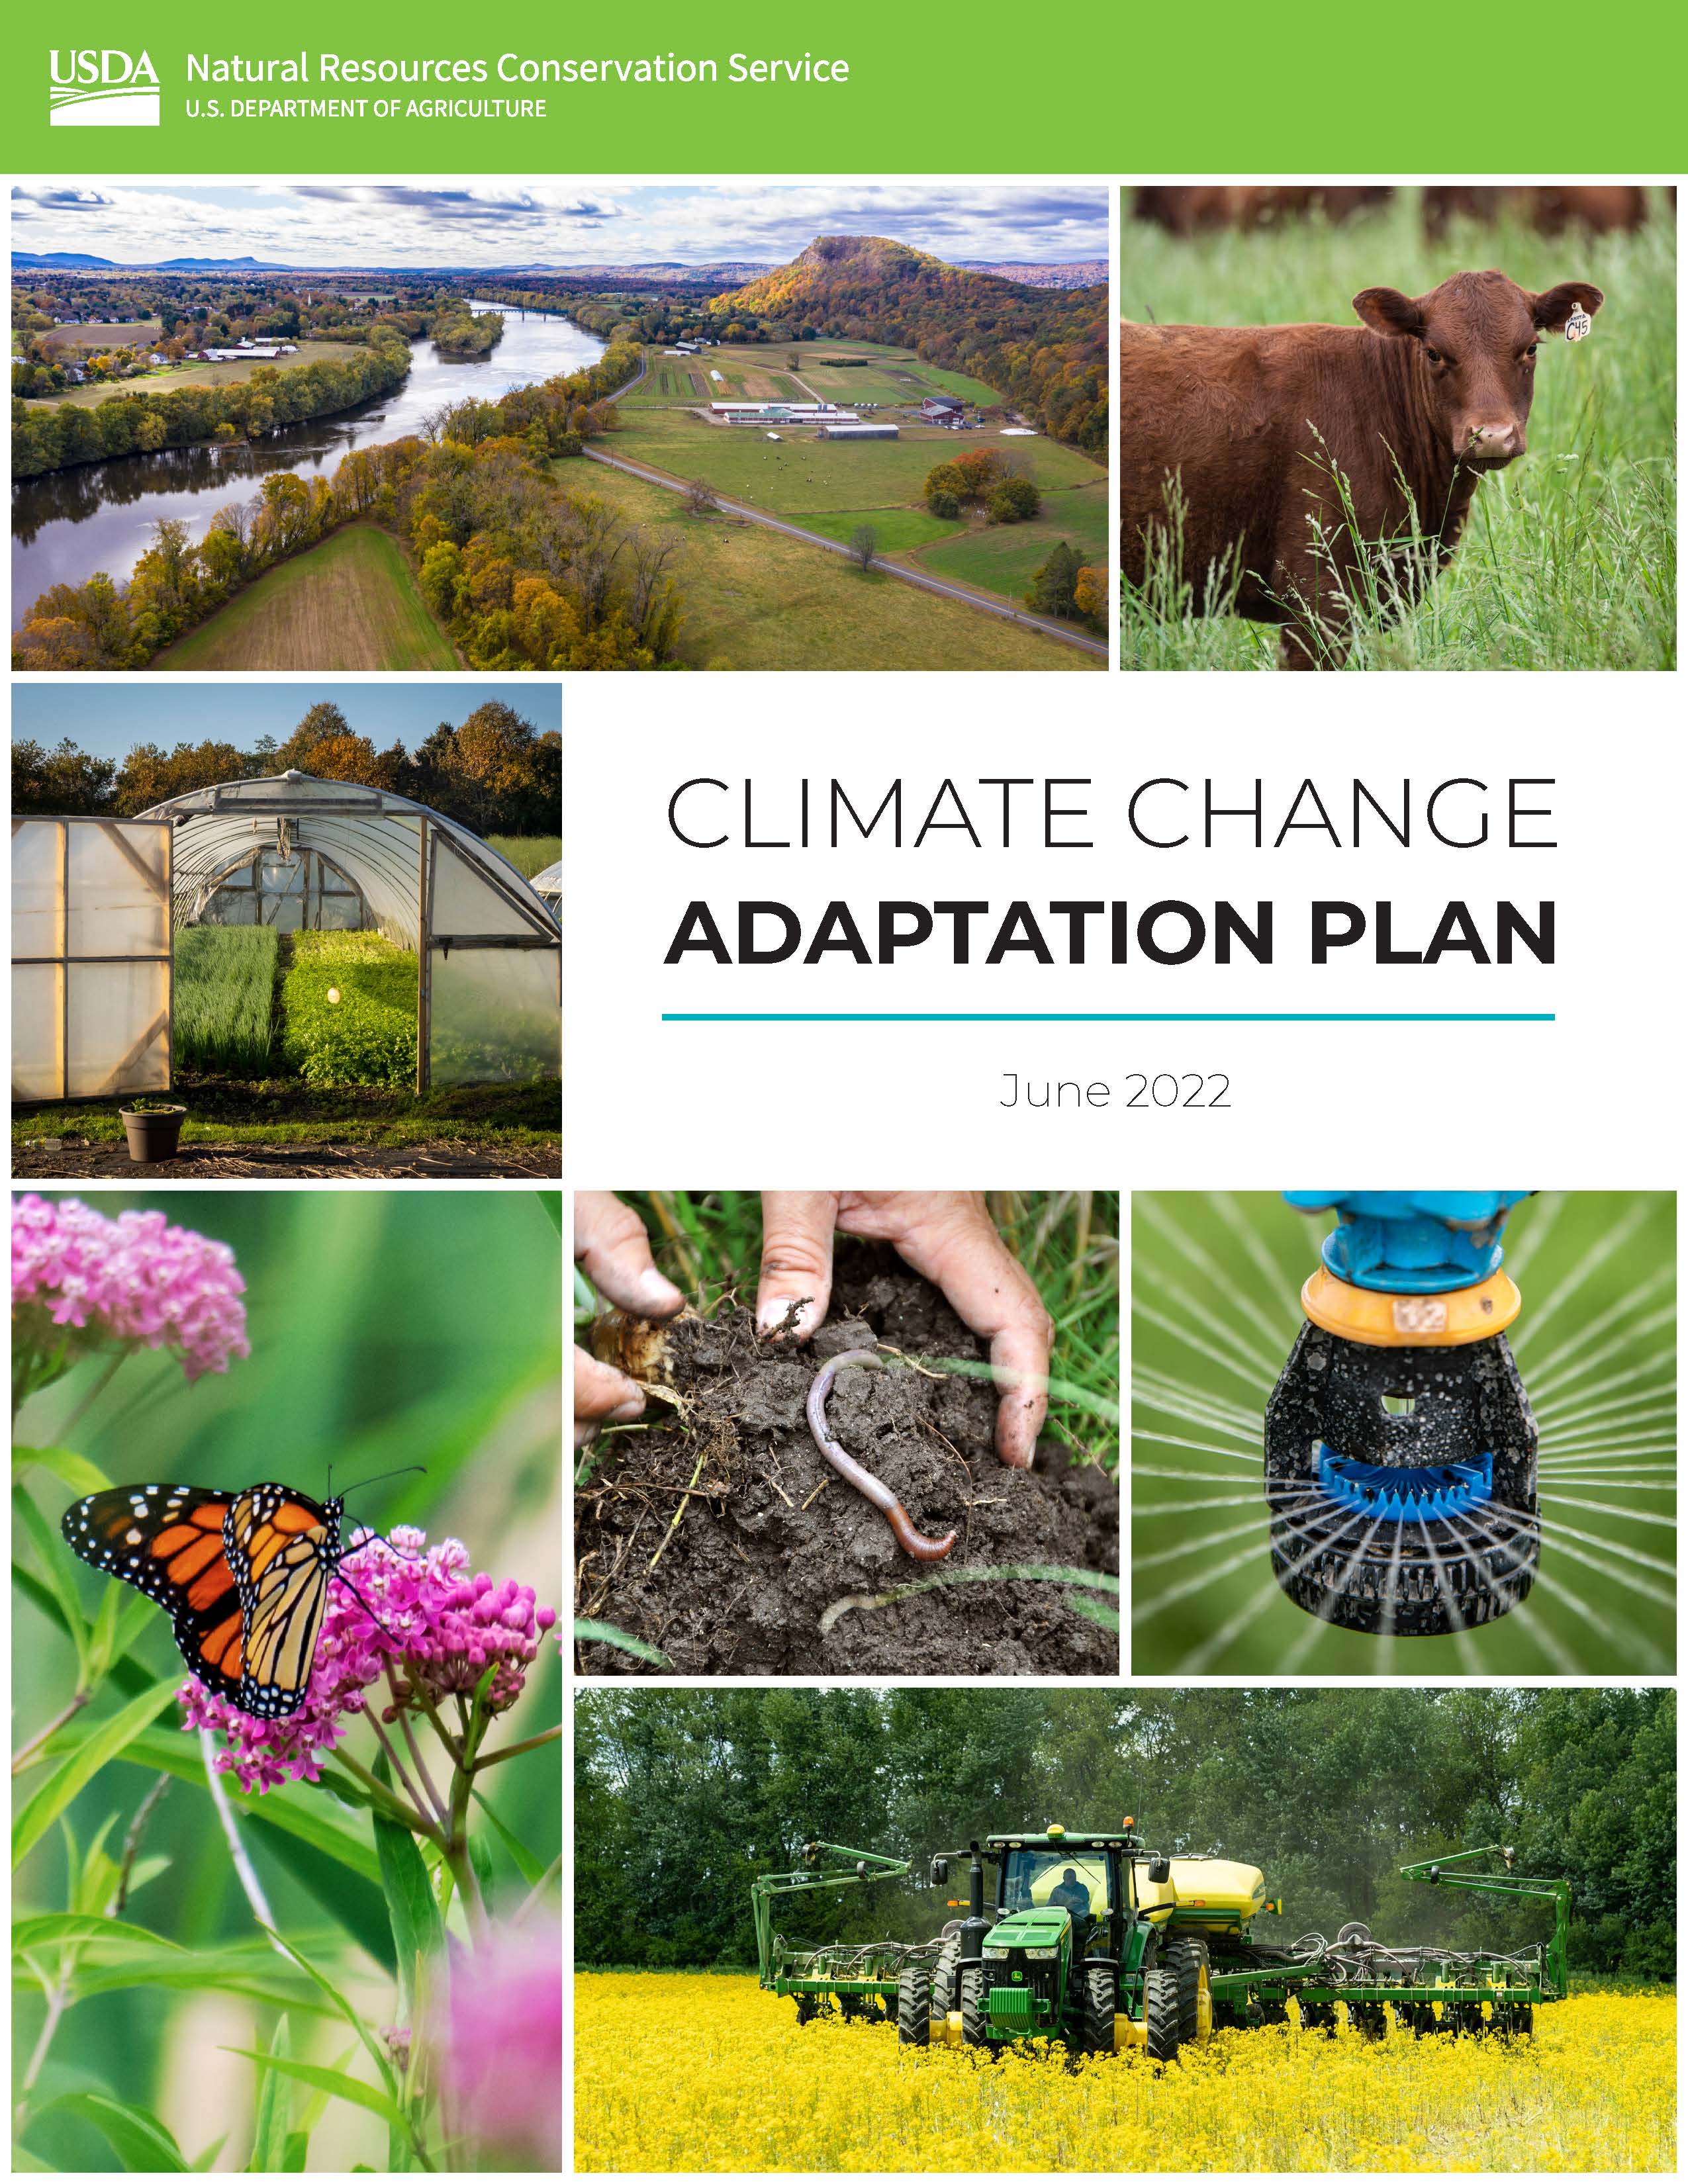 Cover page for the 2022 NRCS Action Plan for Climate Adaptation and Resilience, mosaic image of cow, river, butterfly, soil, greenhouse, sprinkler, tractor.